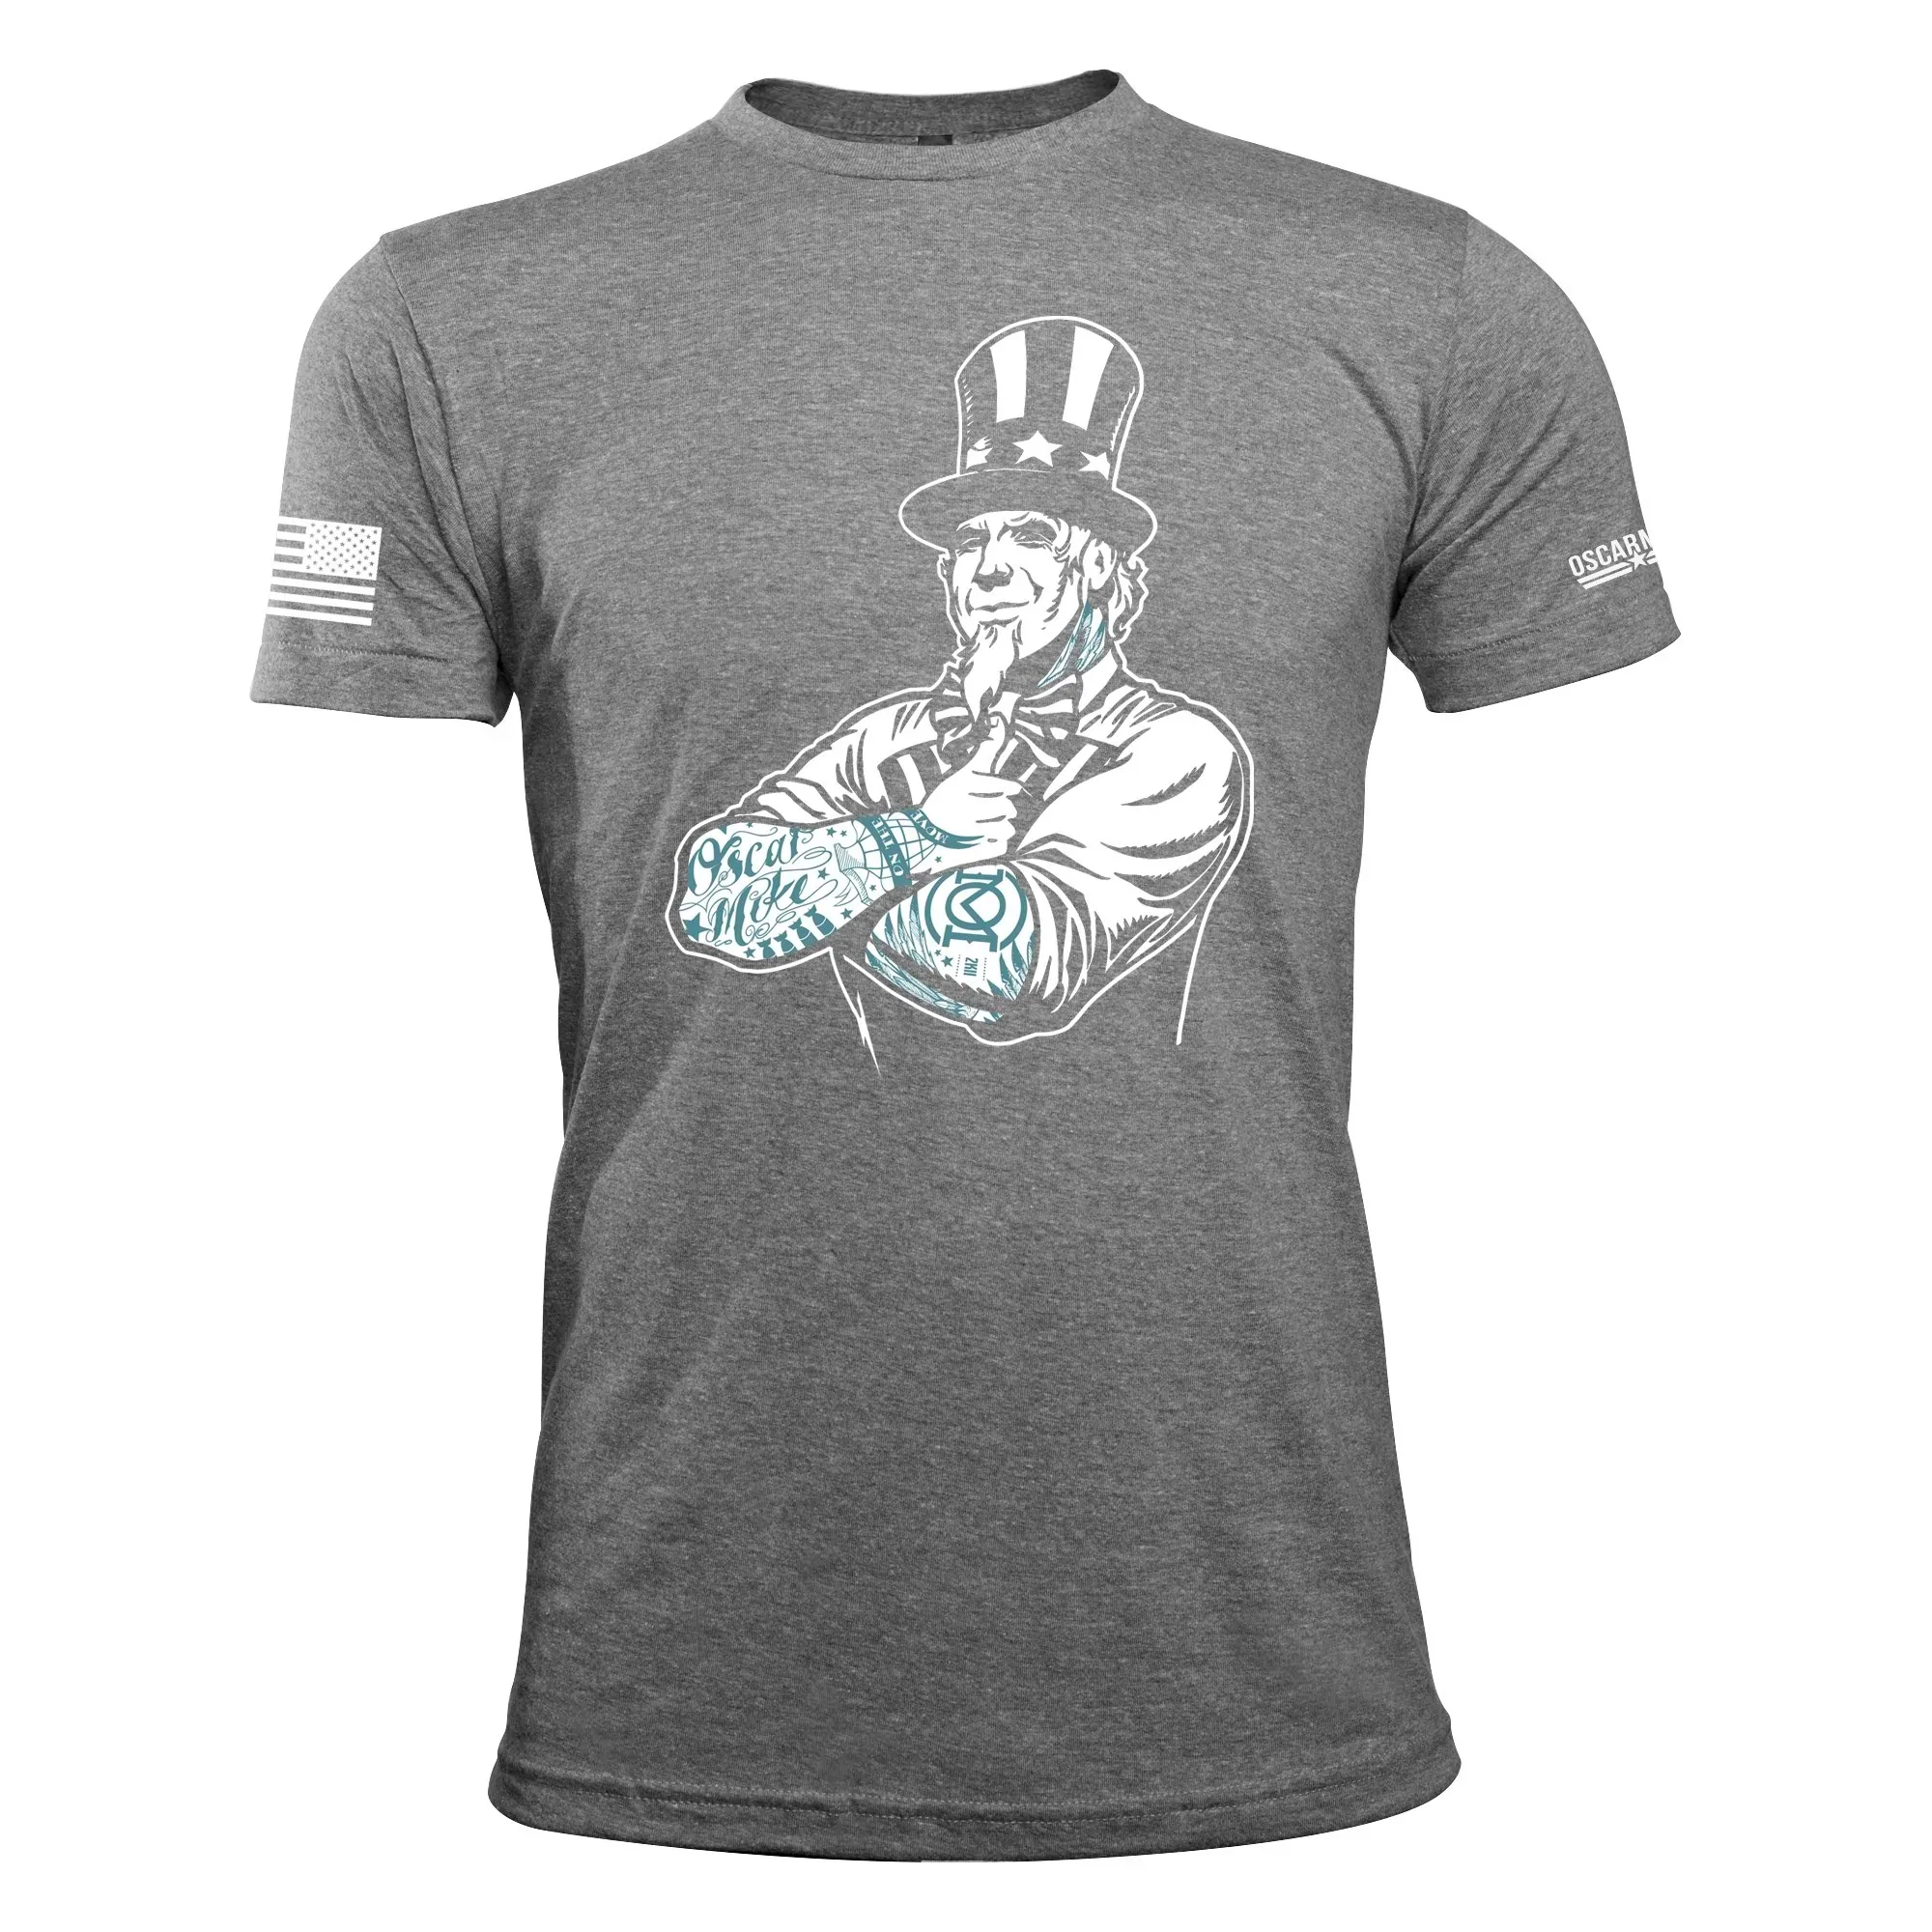 Oscar Mike Men's Uncle Sam Tee posted by ProdOrigin USA in Men's Apparel